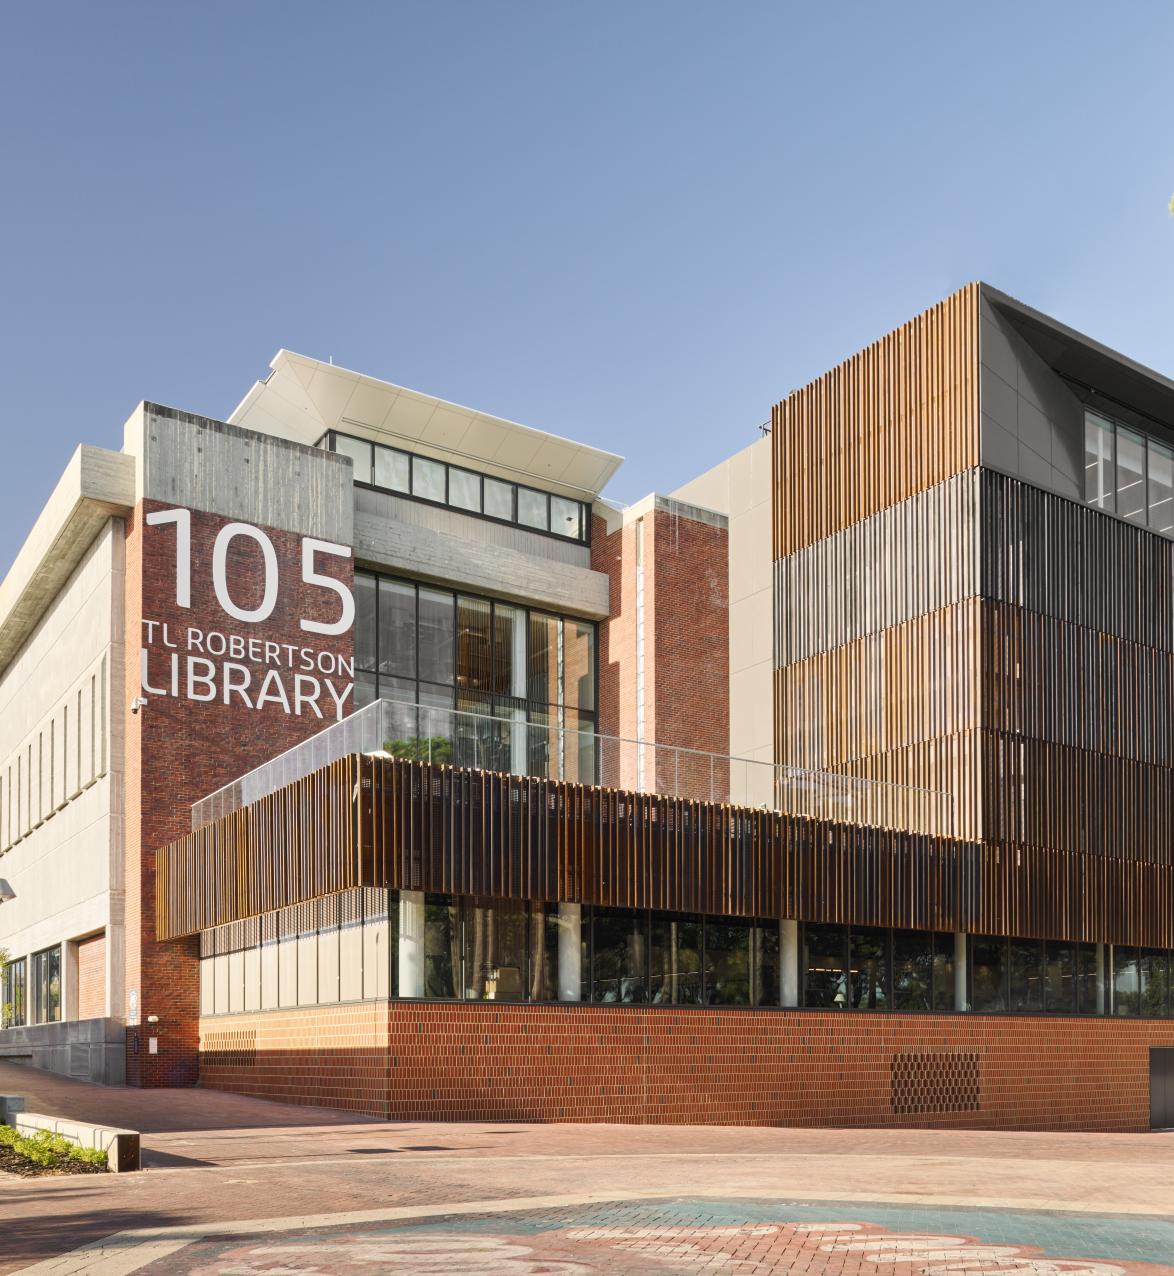 Exterior view of brown brick library building wit 105 TL Robertson Library written on the front